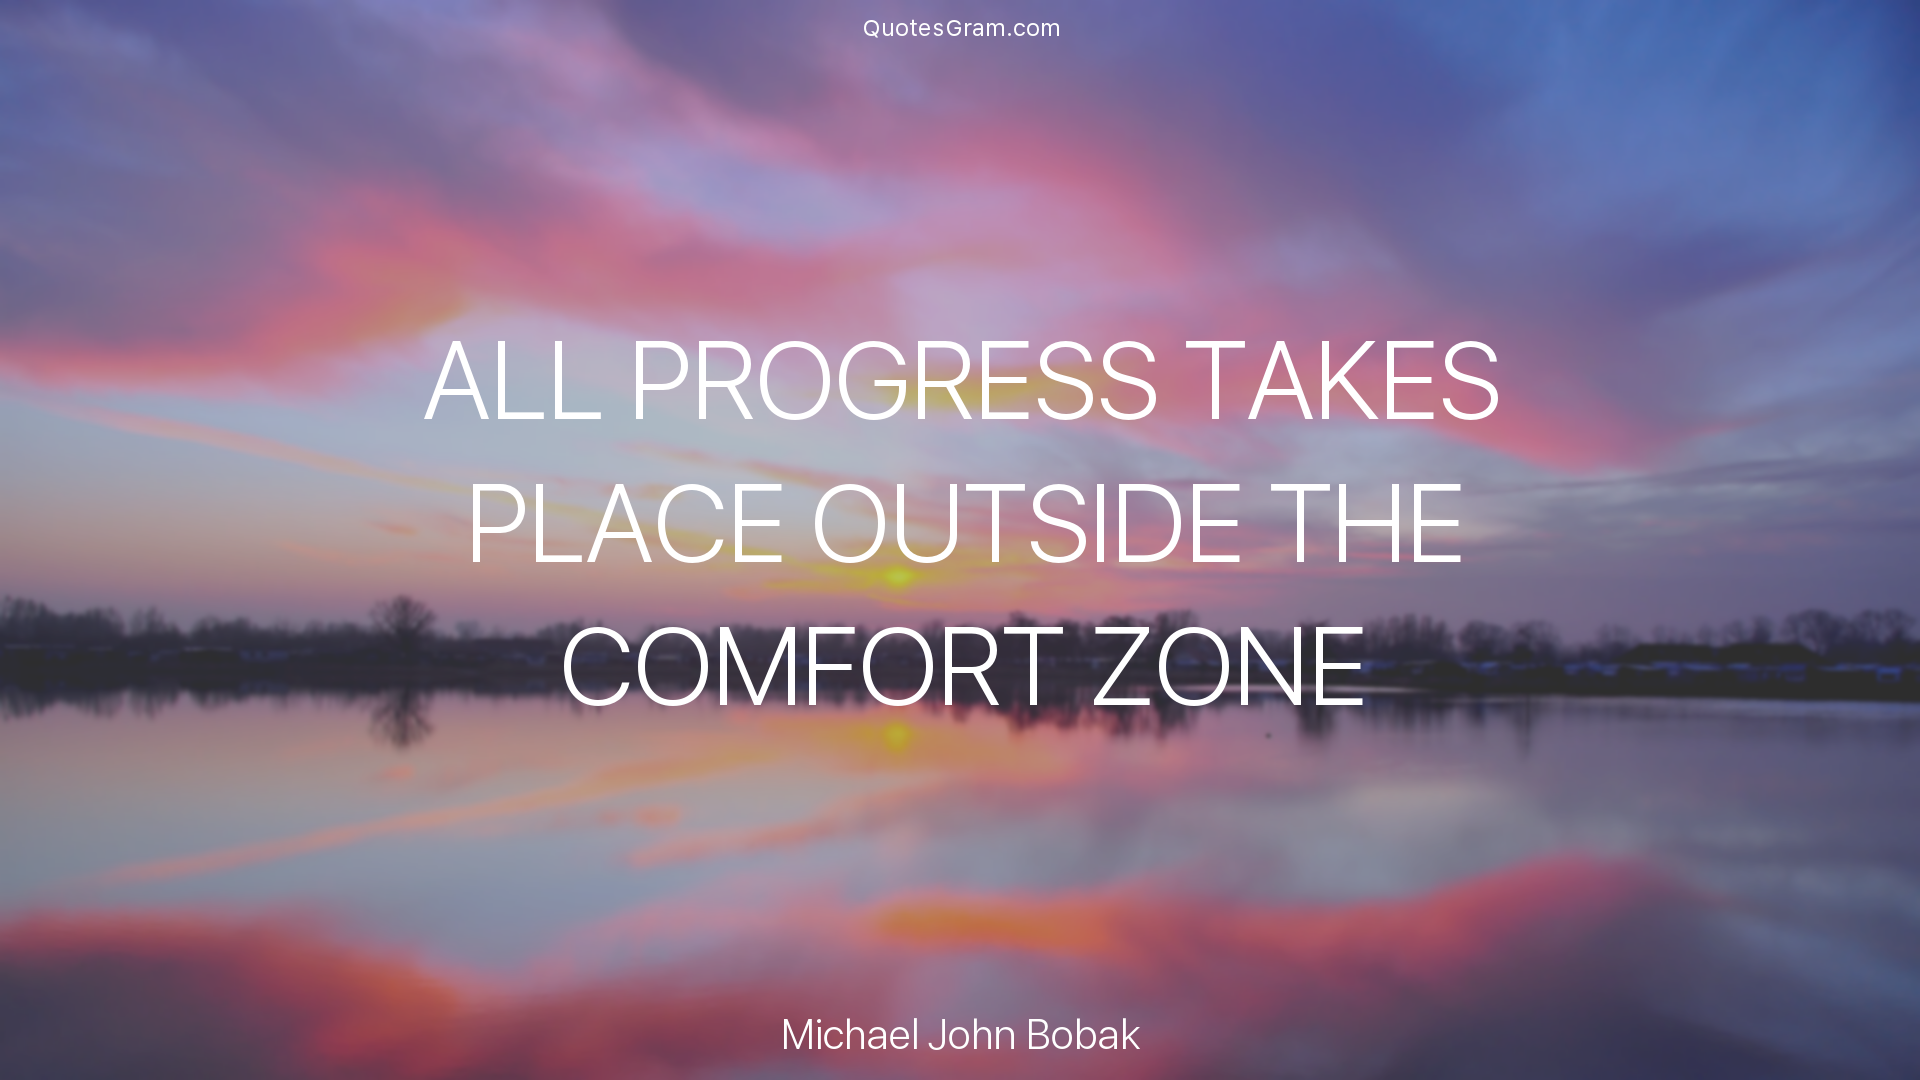 michael-john-bobak-quote-all-progress-takes-place-outside-the-comfort.png